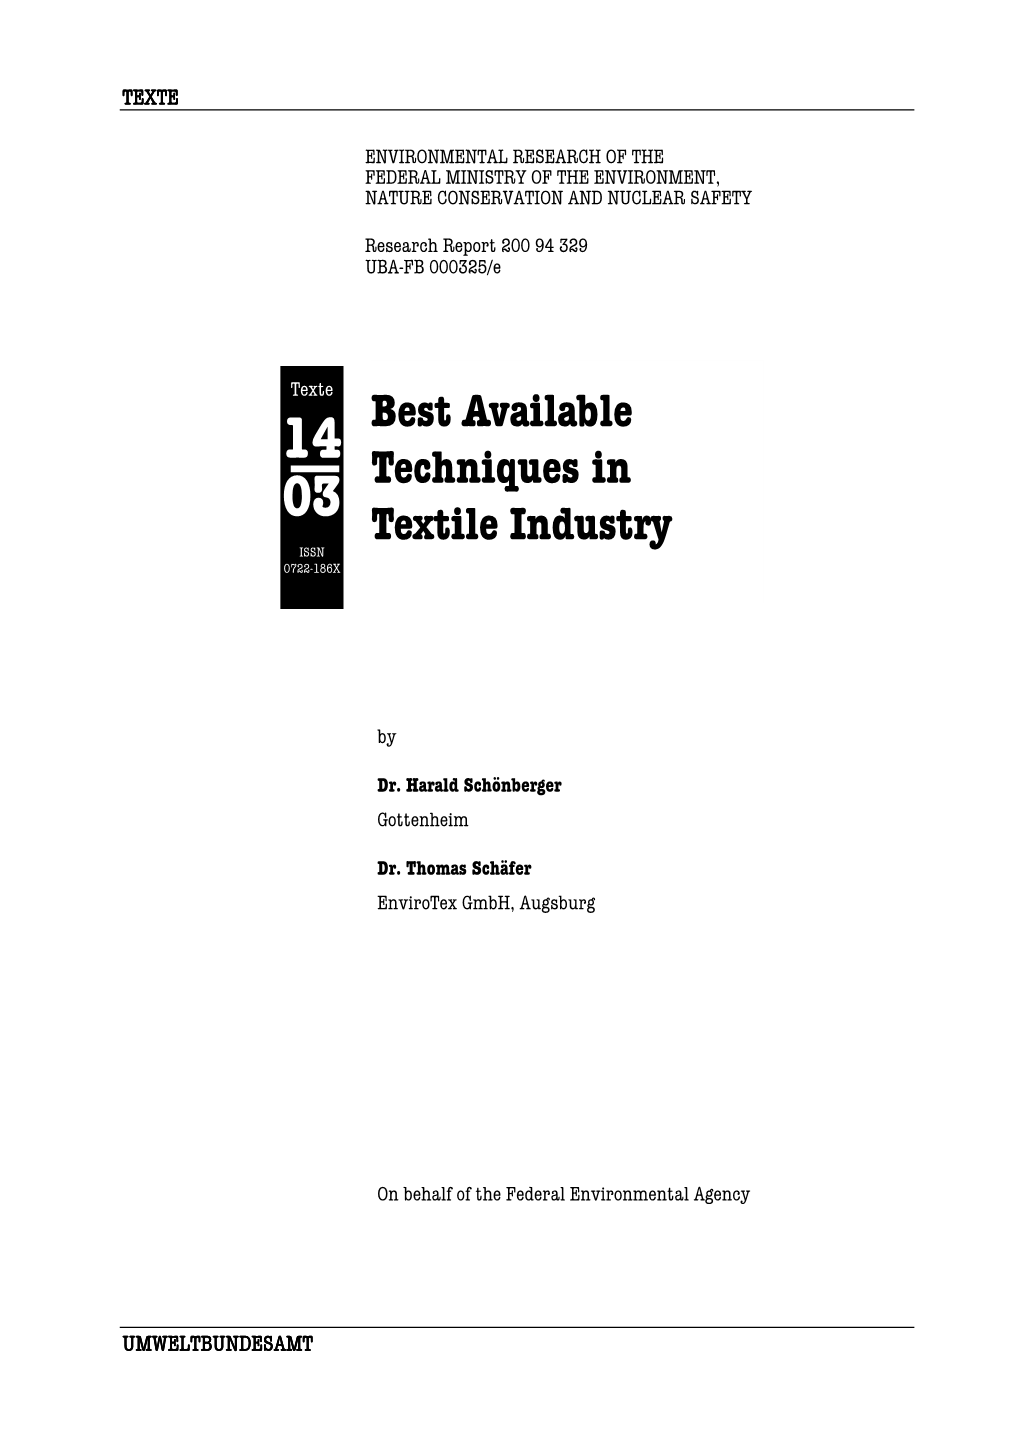 Best Available Techniques in Textile Industry